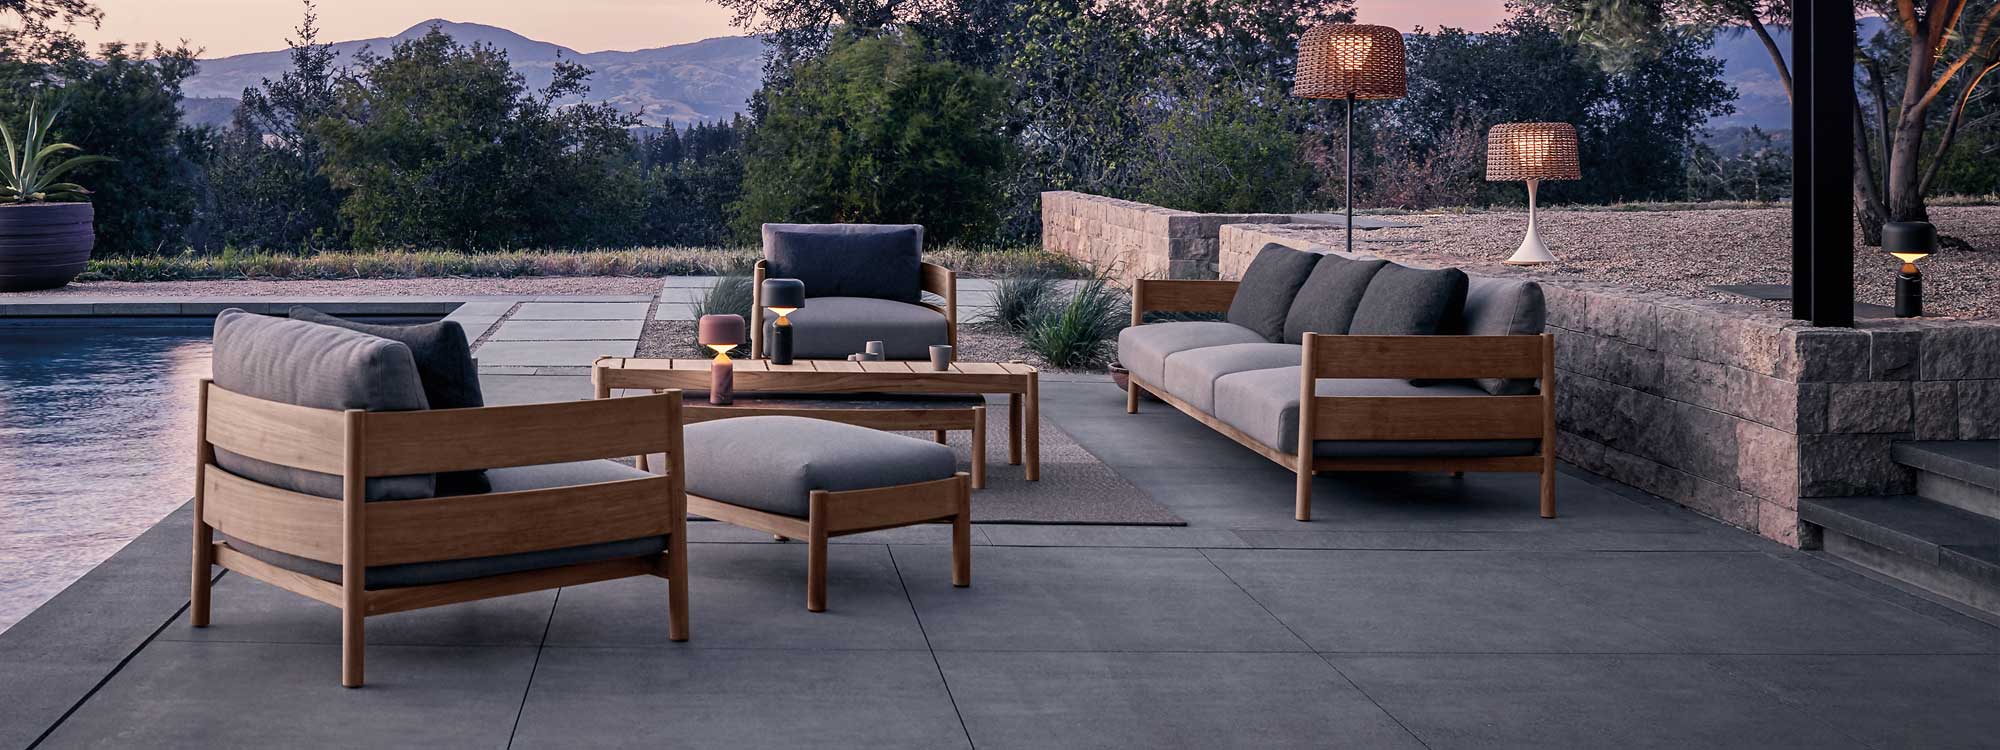 Image at dusk of Haven luxury teak sofa and lounge chairs, together with Mesh outdoor lighting by Gloster, on poolside terrace with trees and hills in the background